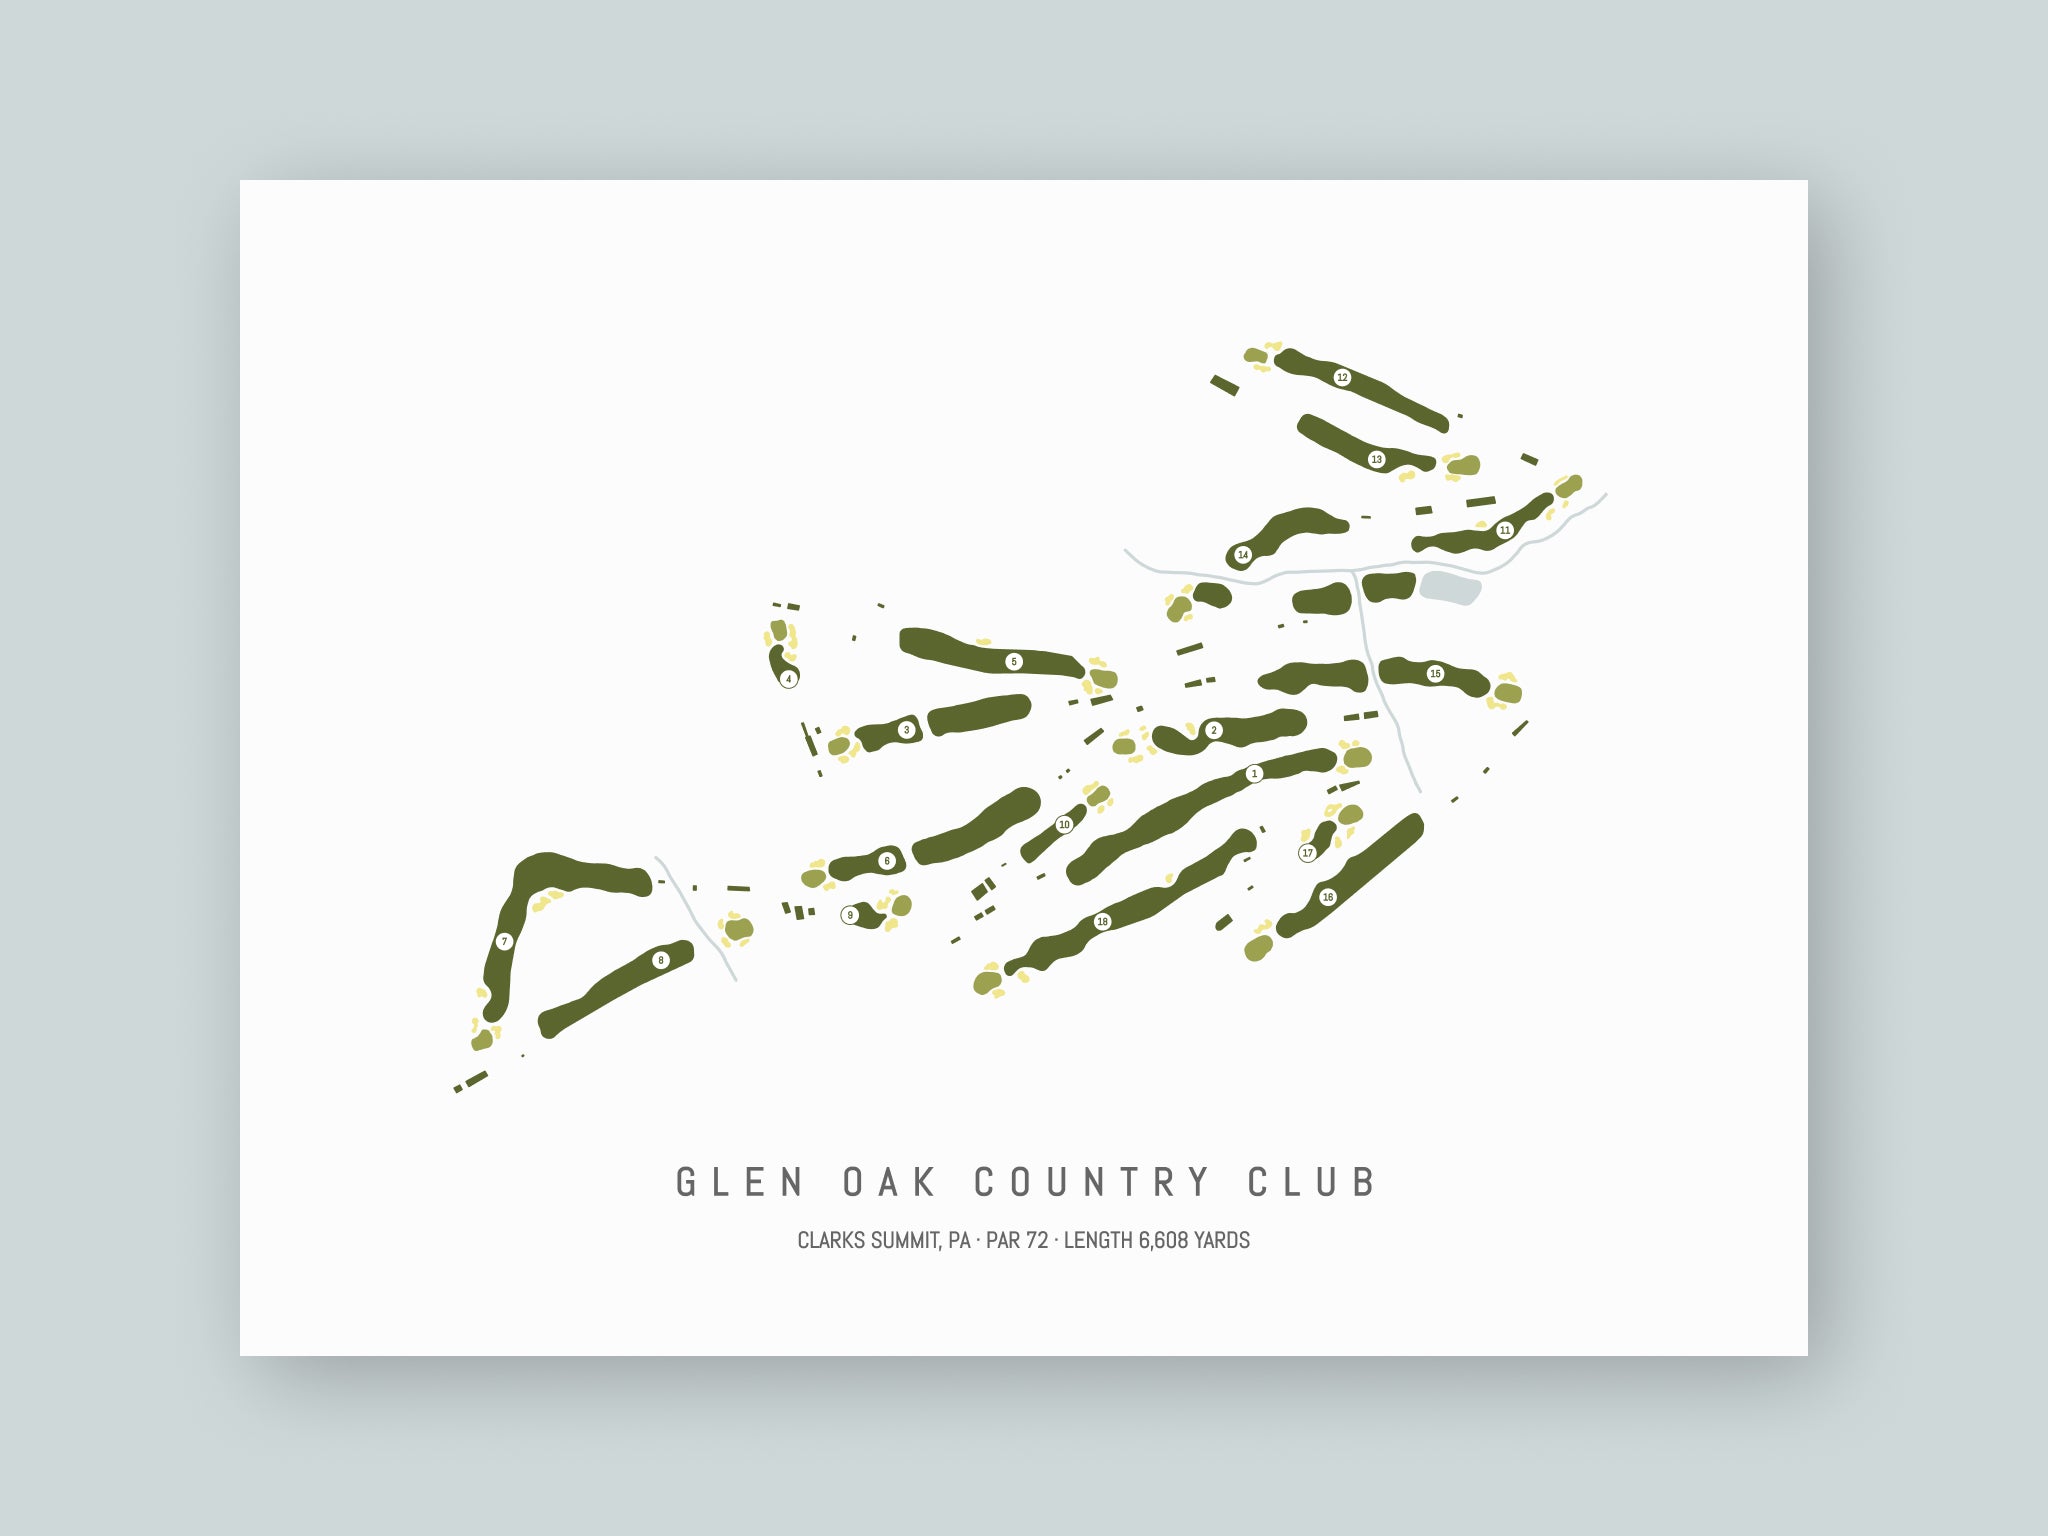 Glen-Oak-Country-Club-PA--Unframed-24x18-With-Hole-Numbers